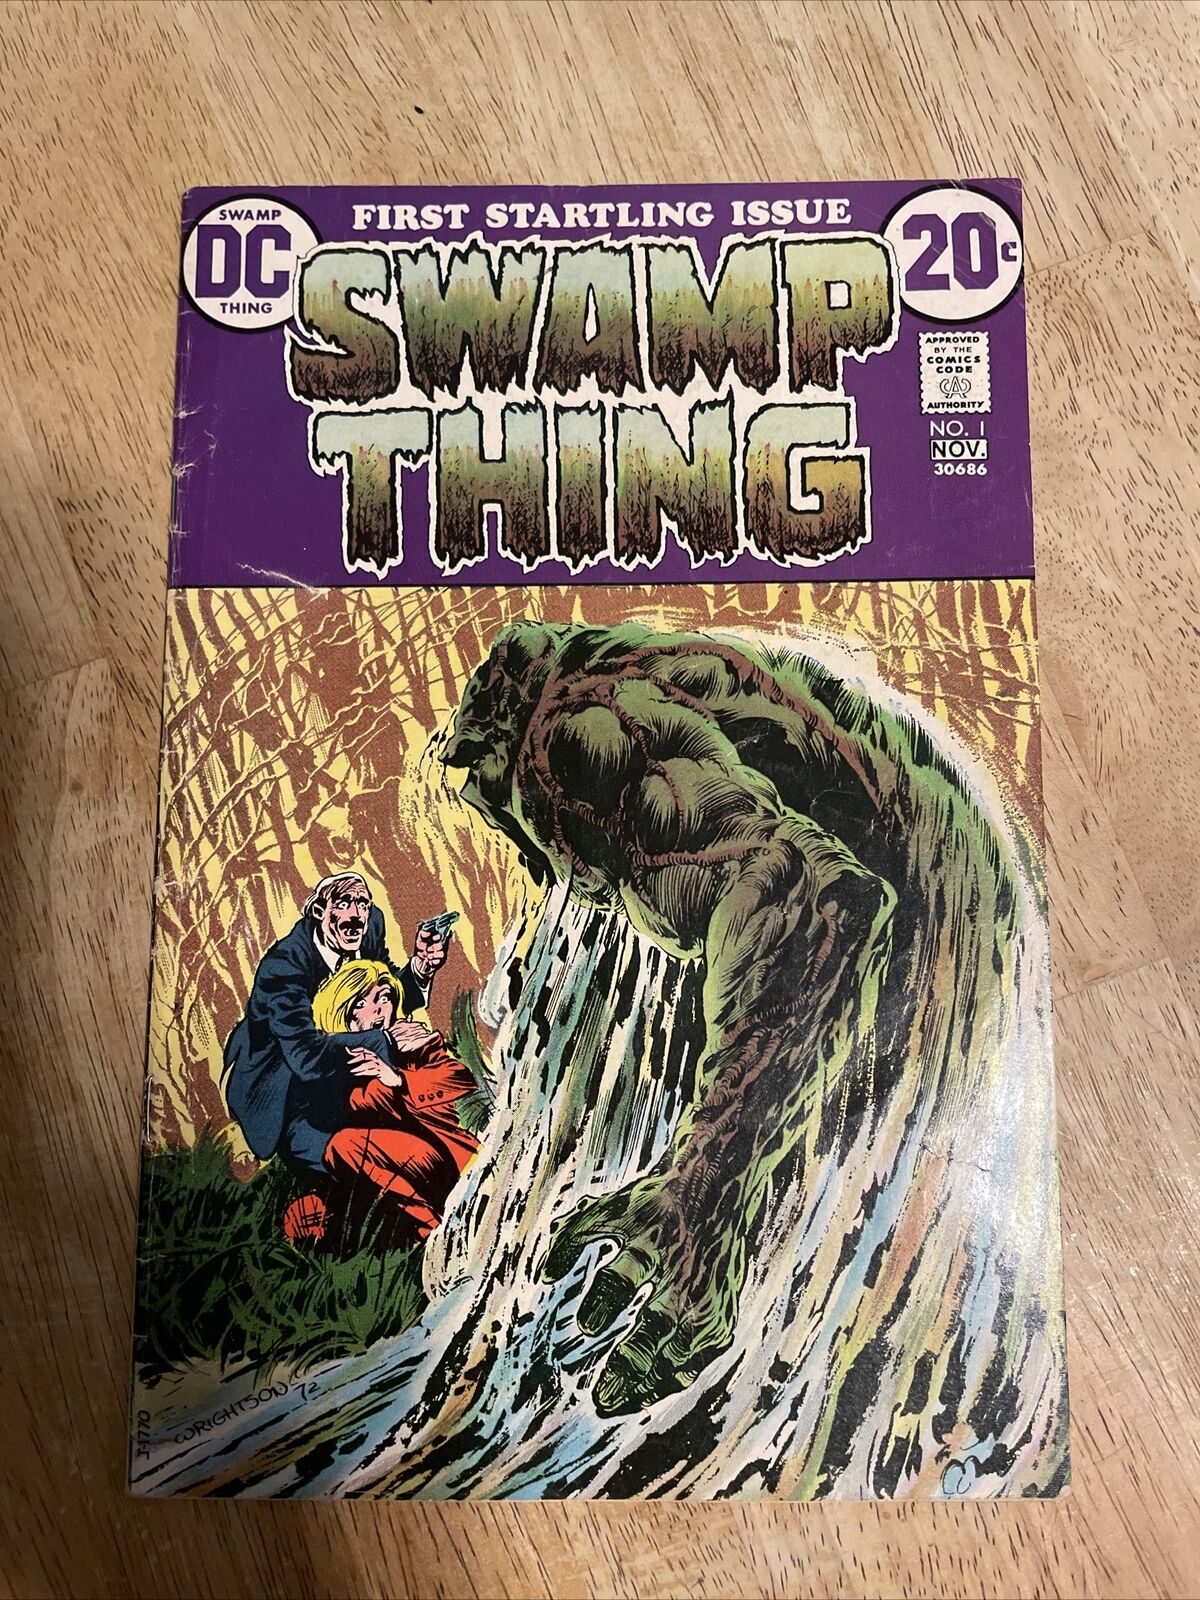 Swamp Thing #1 DC 1972 First series, Wrightson art